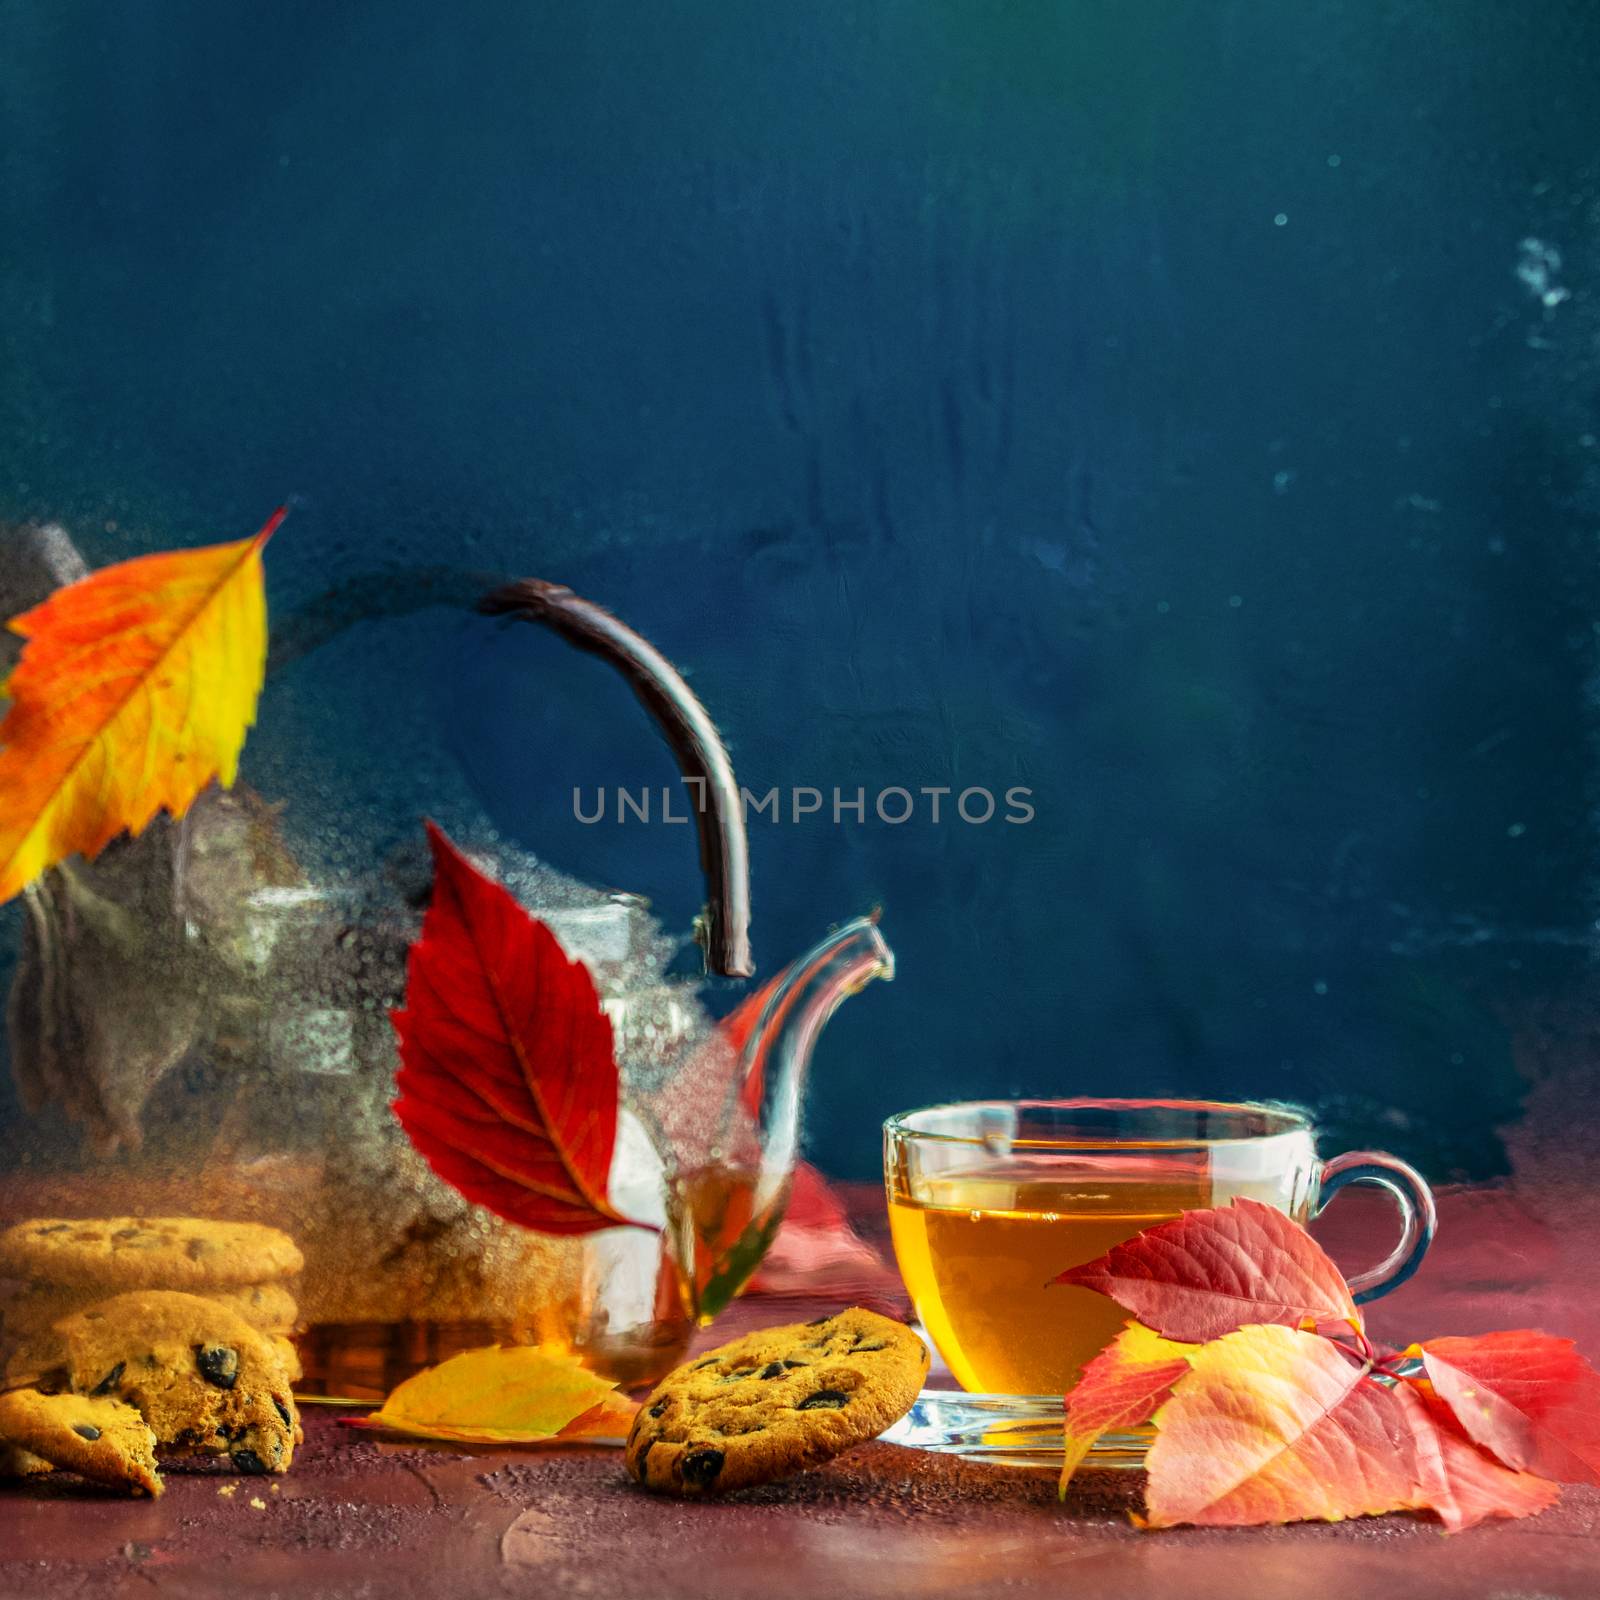 Autumn teatime composition on dark background with colored leaves and chocolate cookies, sun light beam on the cup behind the glass with water dew drops, selective focus